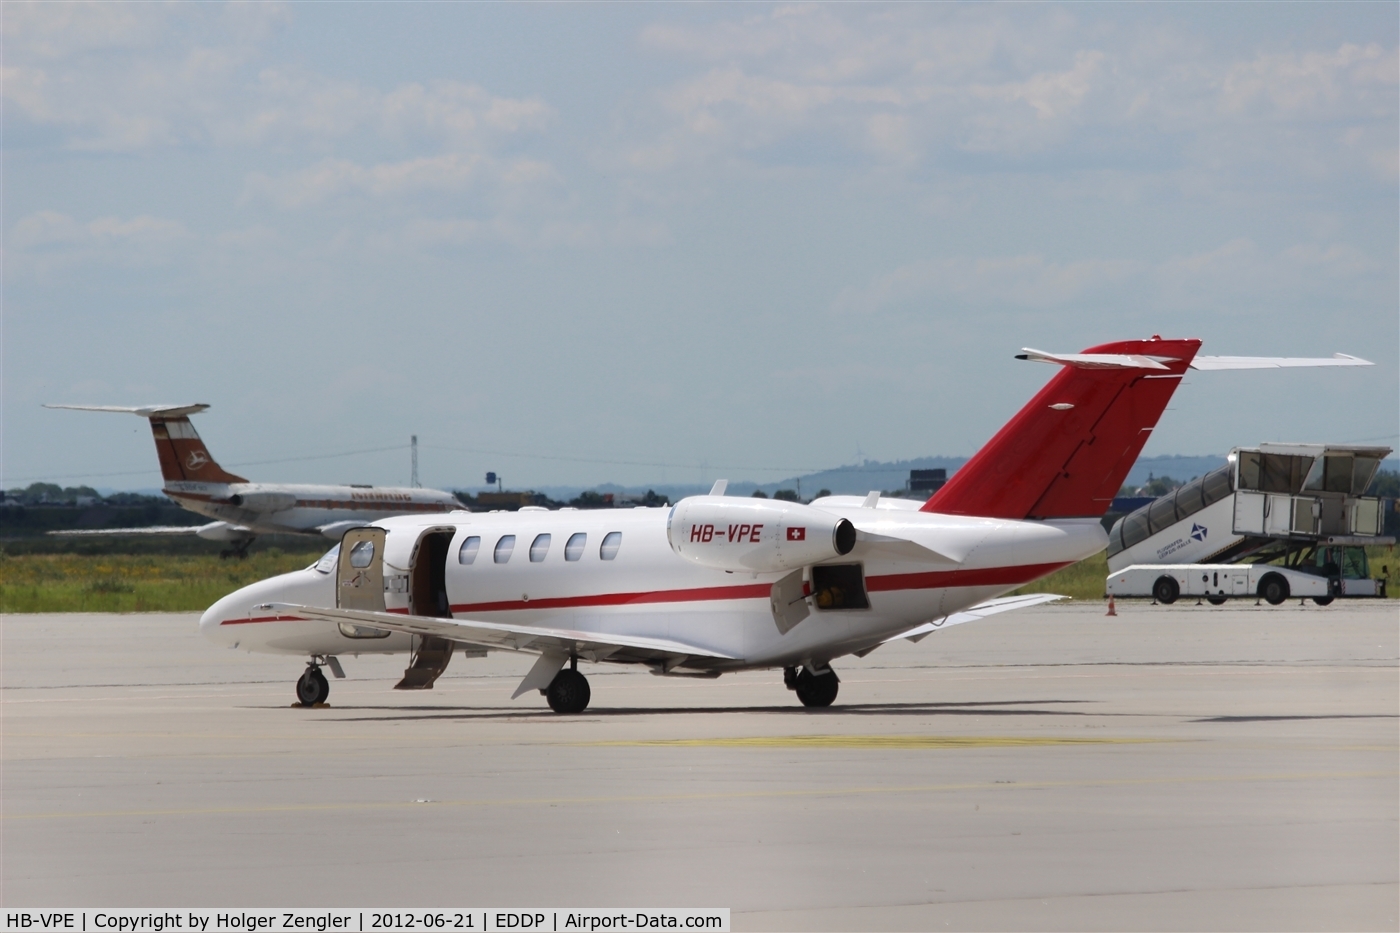 HB-VPE, 2007 Cessna Citation CJ2+ C/N 525A0375, Visitor from Switzerland....